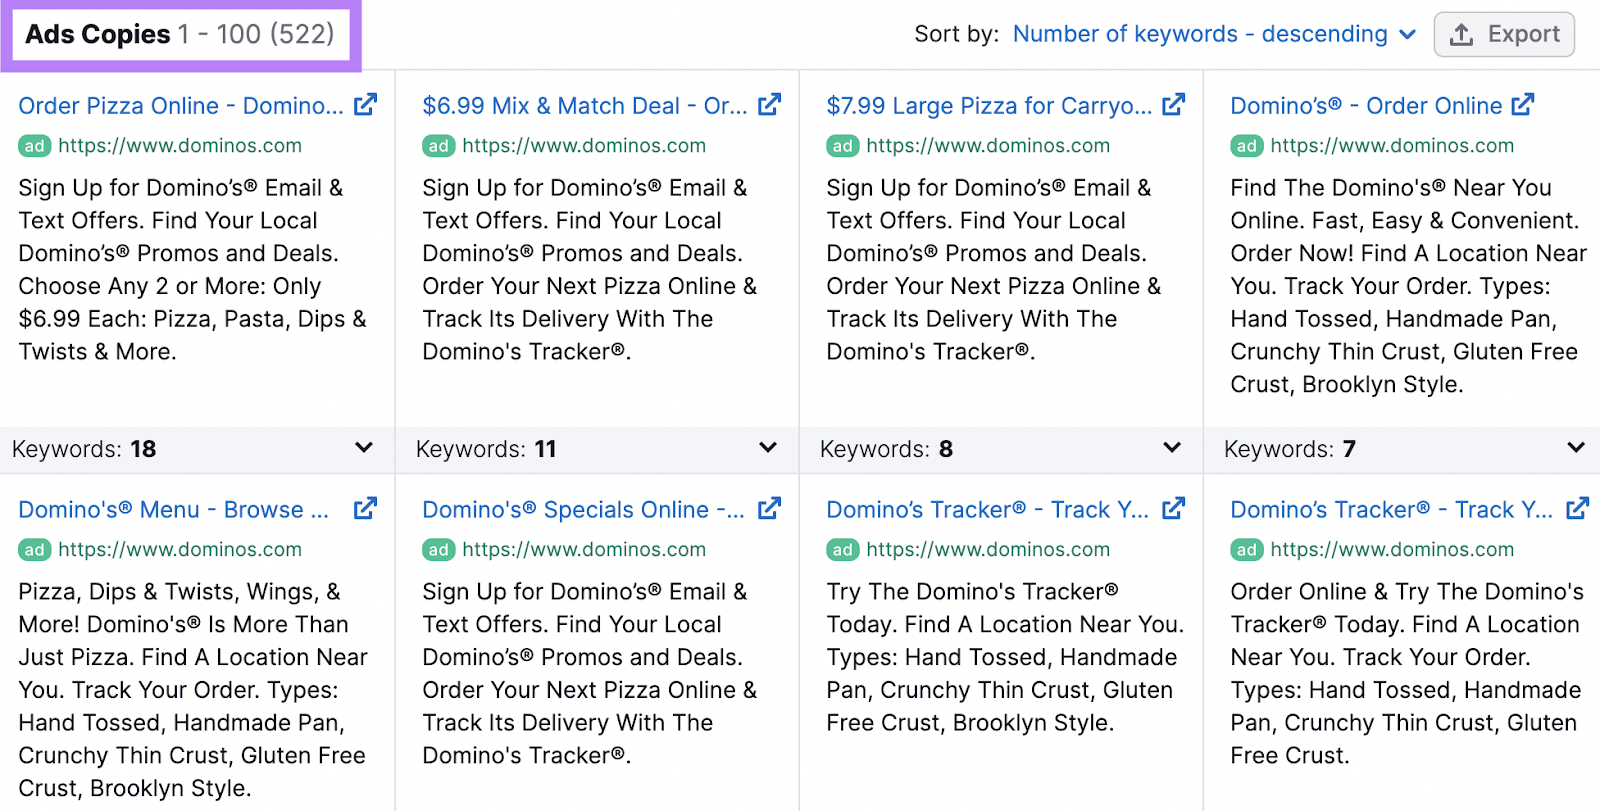 “Ads Copies” report in the Advertising Research tool for "dominos.com"